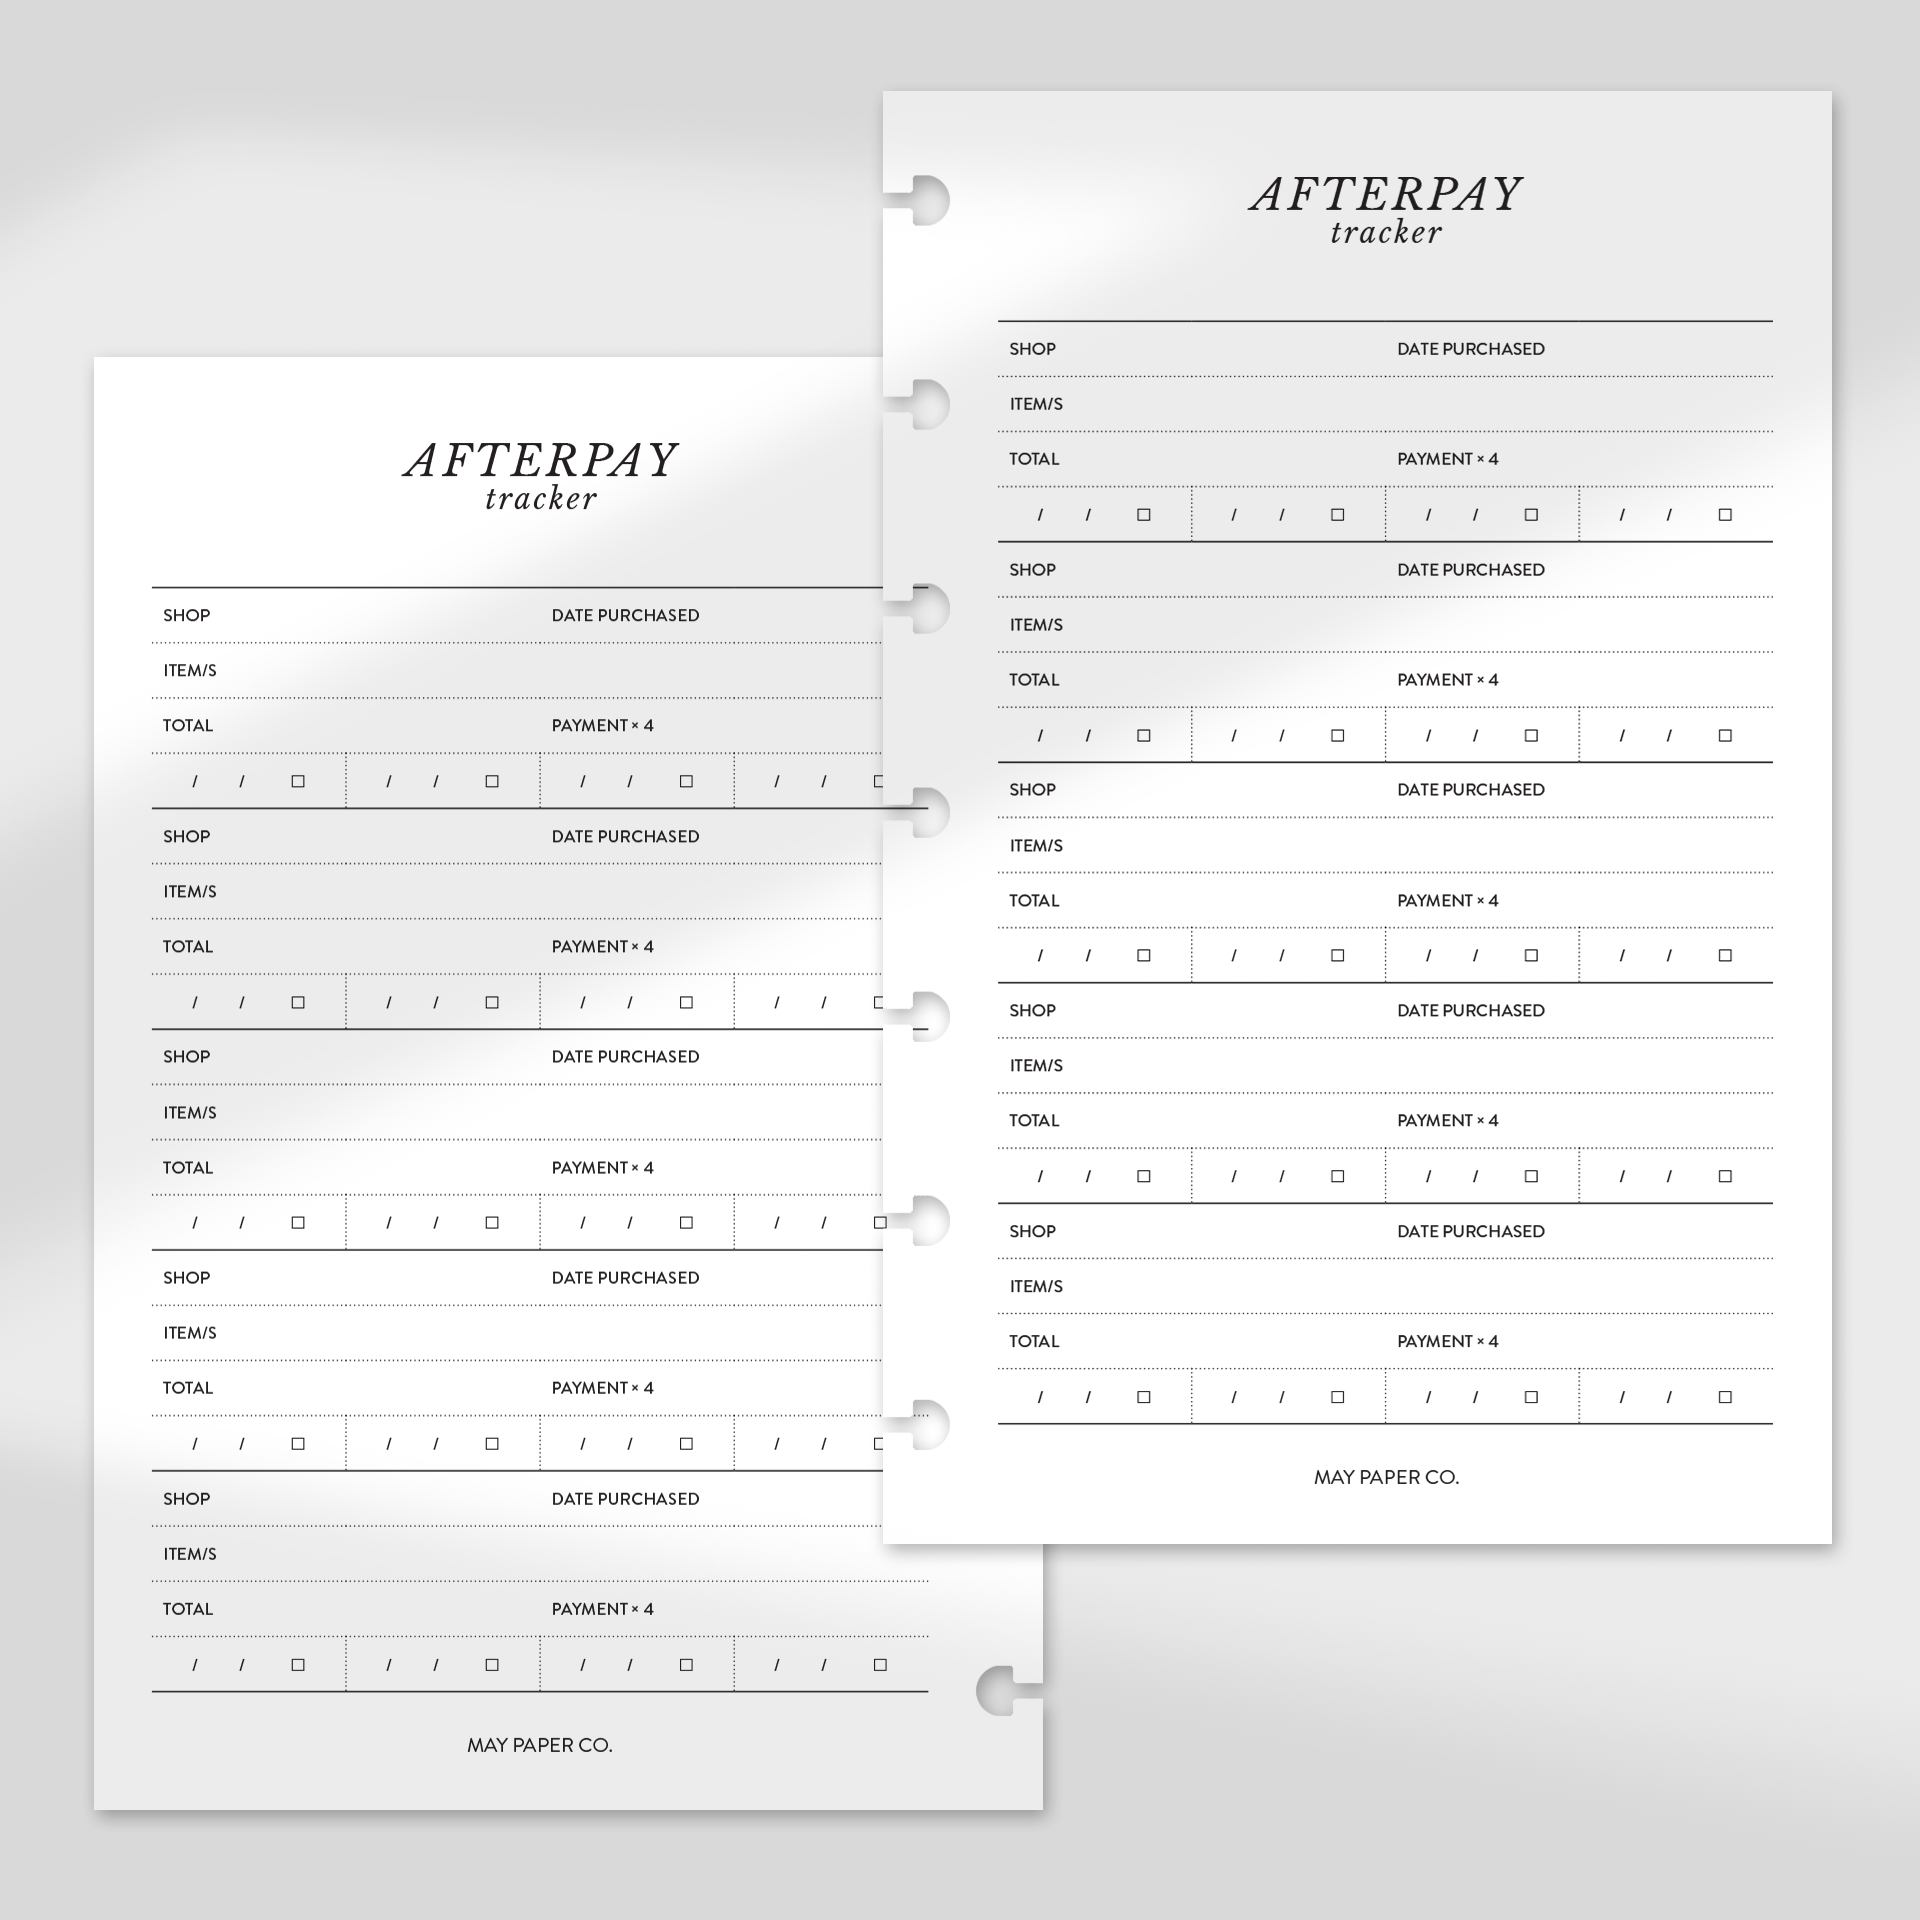 PRINTABLE Afterpay Tracker